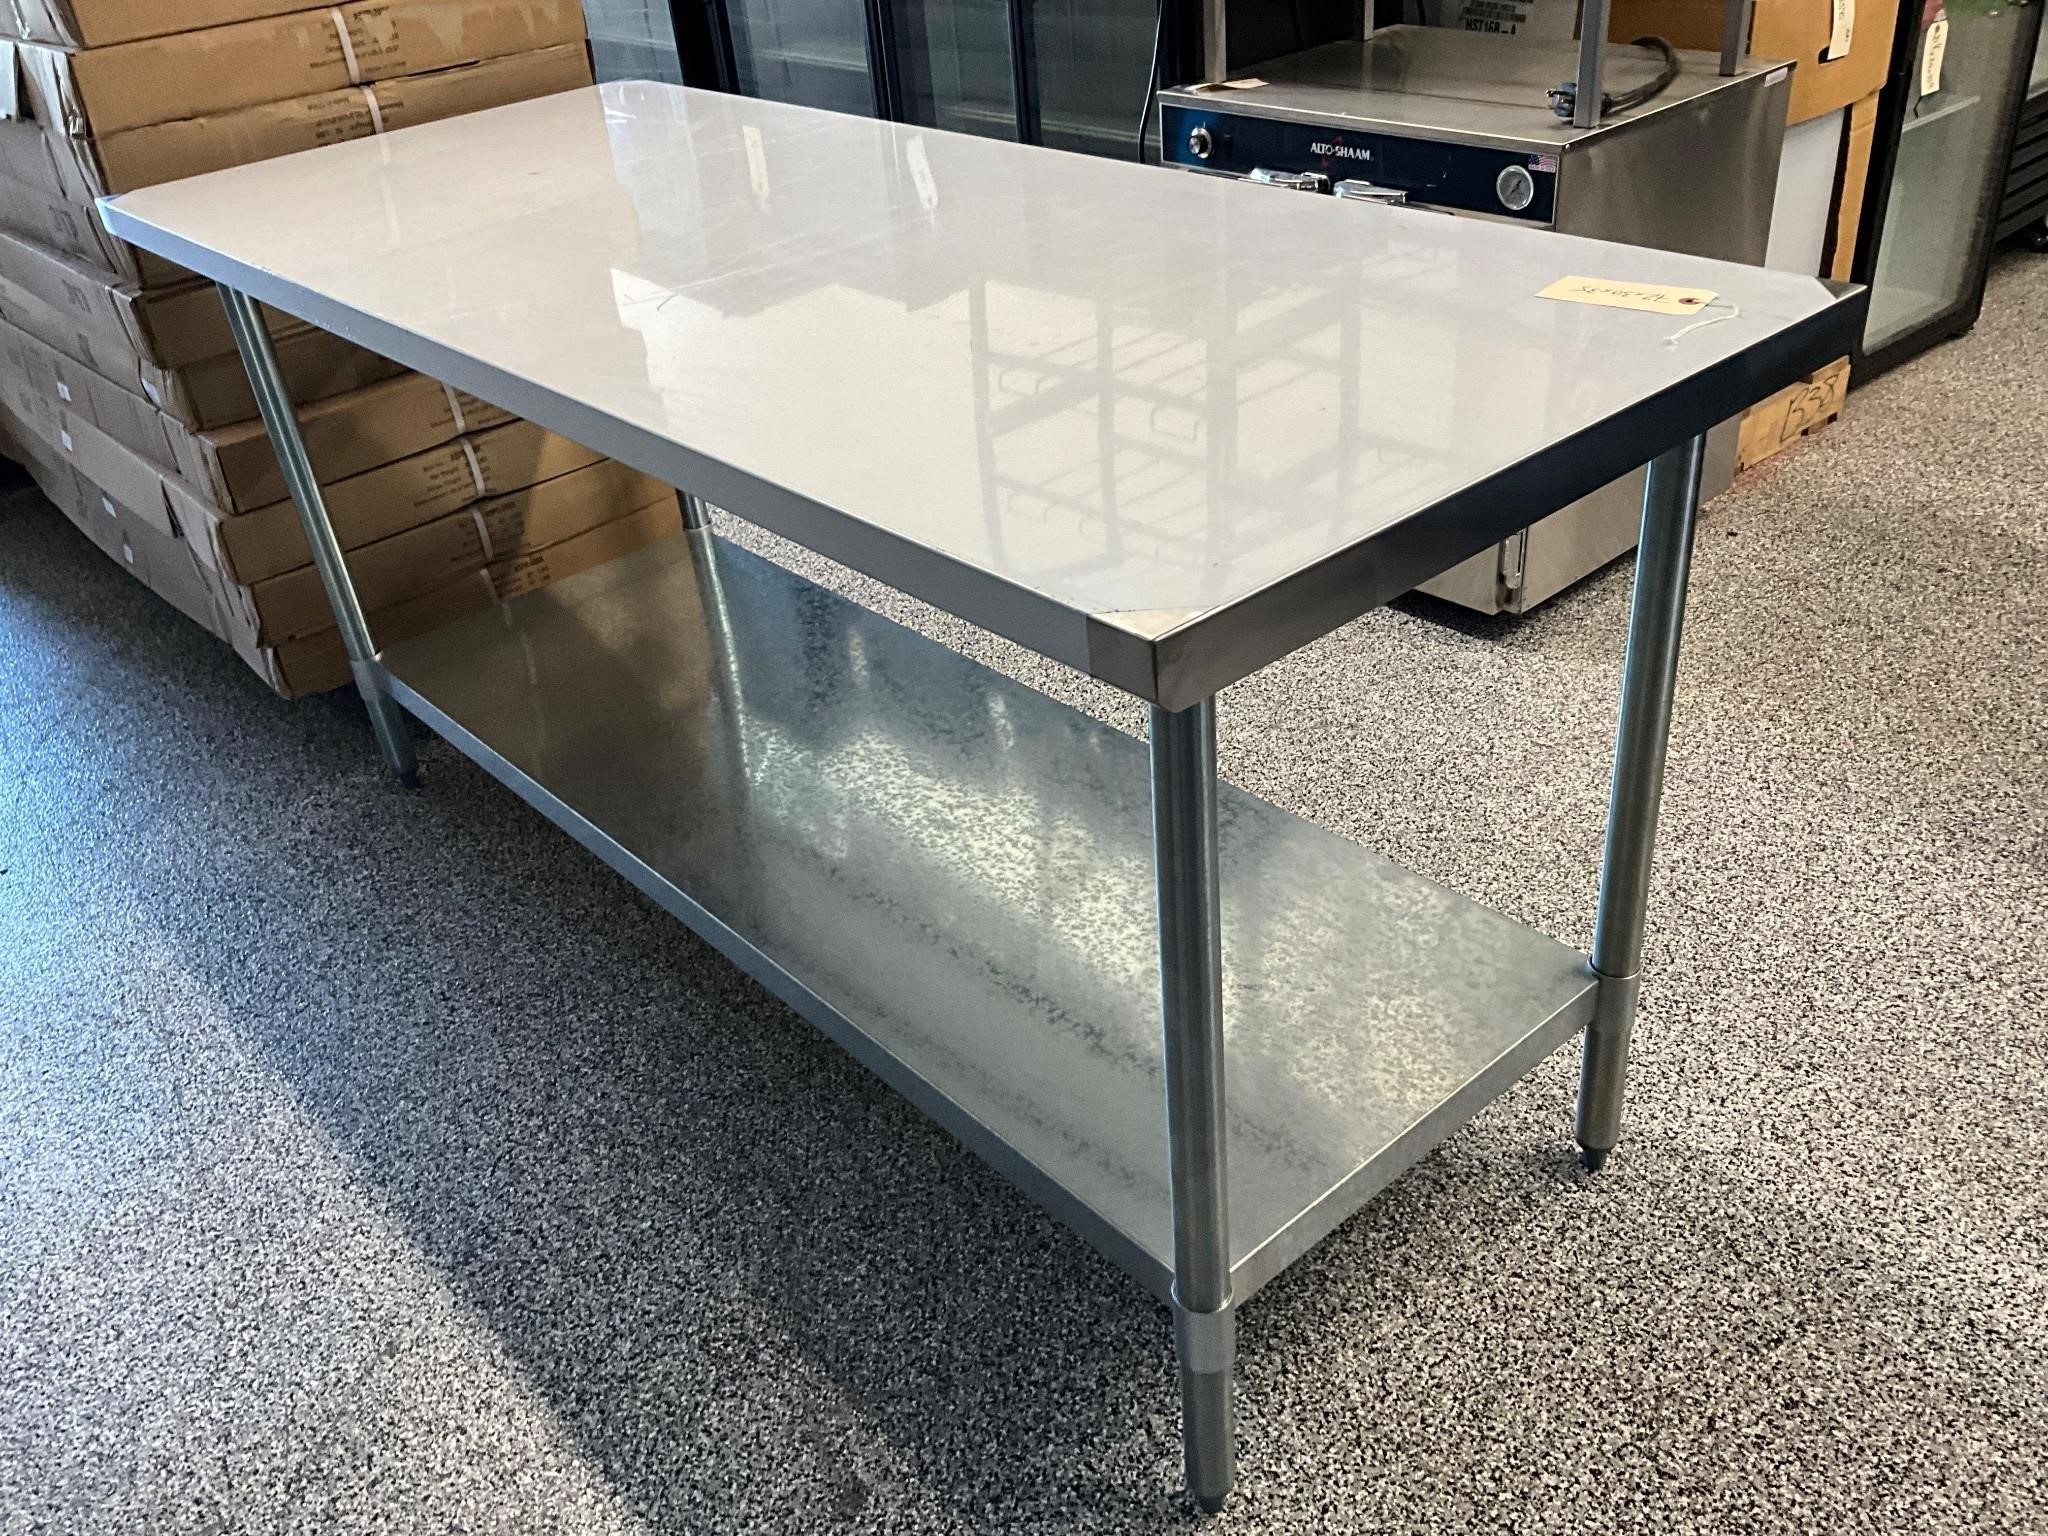 New 72”x30” stainless steel table